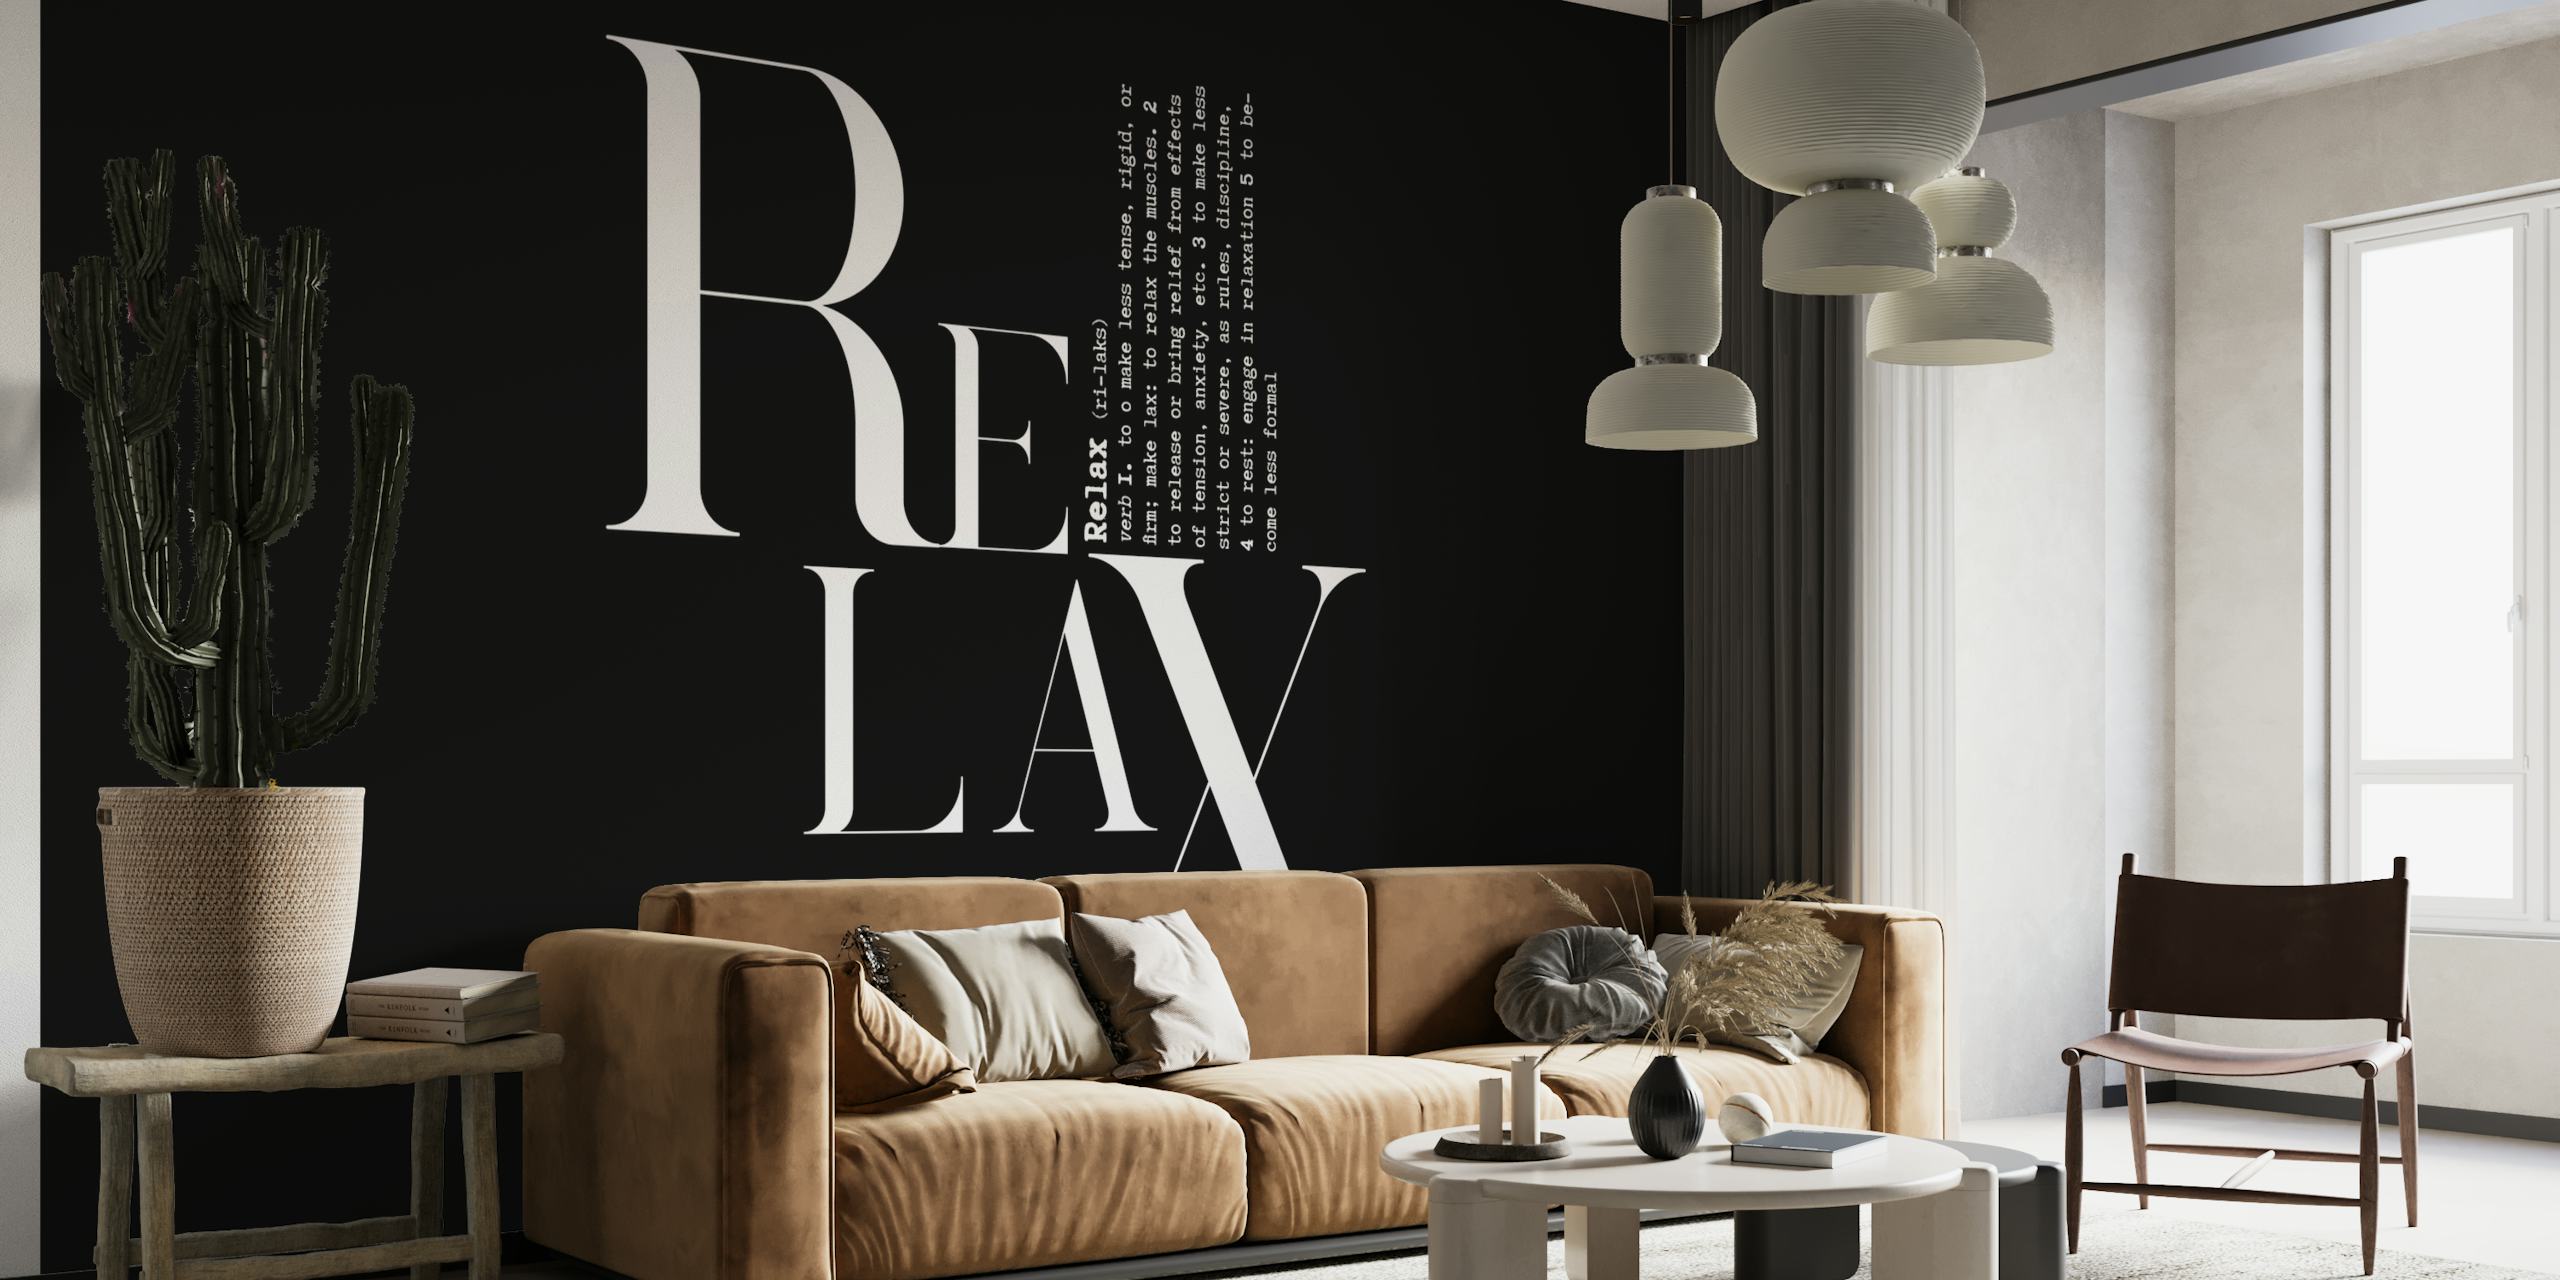 Relax Typo wall mural with modern black and white text design